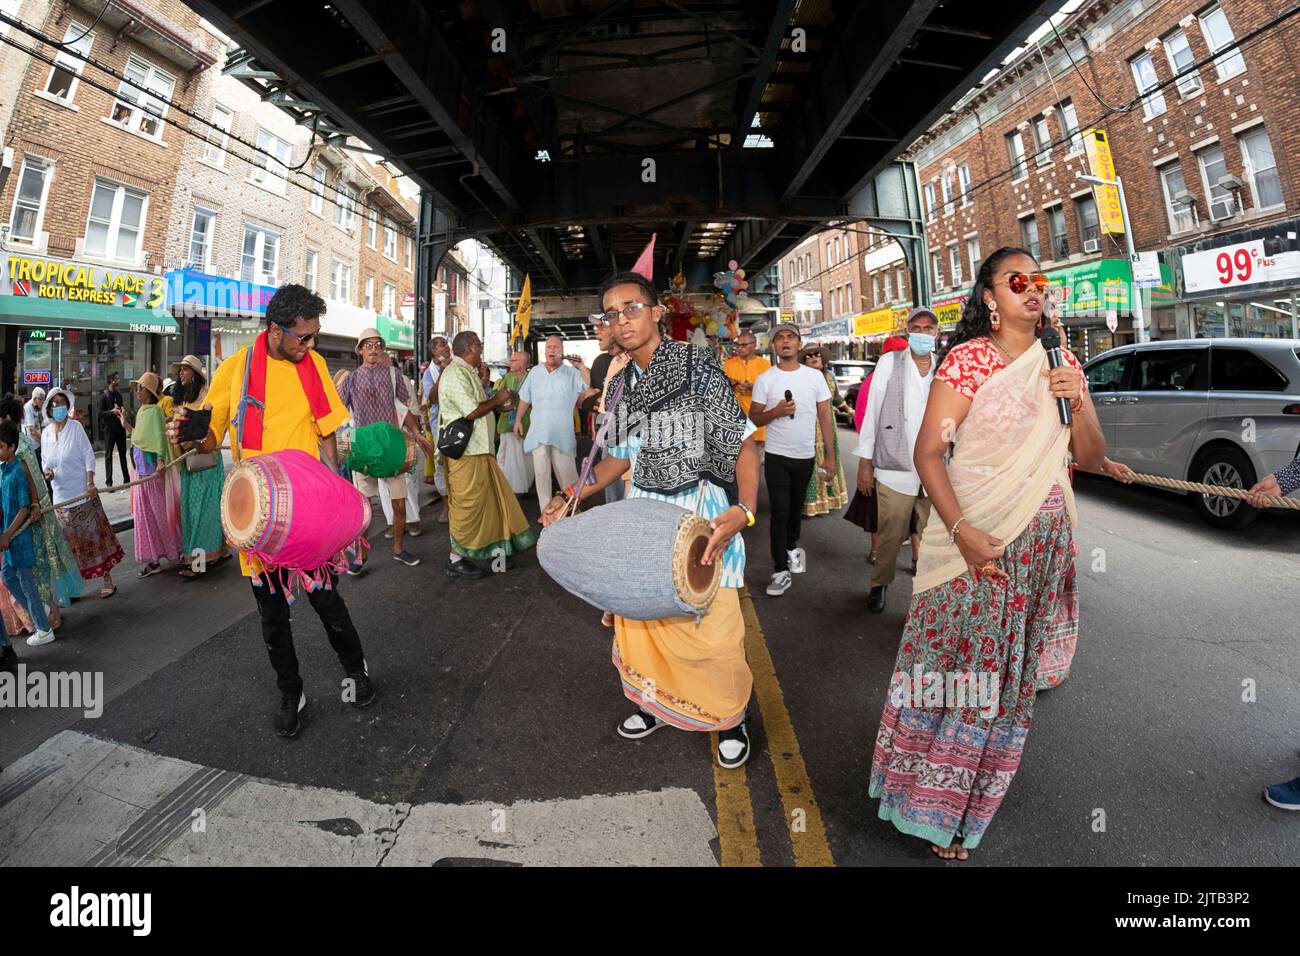 Devout Hindu men & women march, chant and dance under the elevated A train celebrating the 2022 Ratha Yatra in Richmond Hill, Queens, NYC Stock Photo